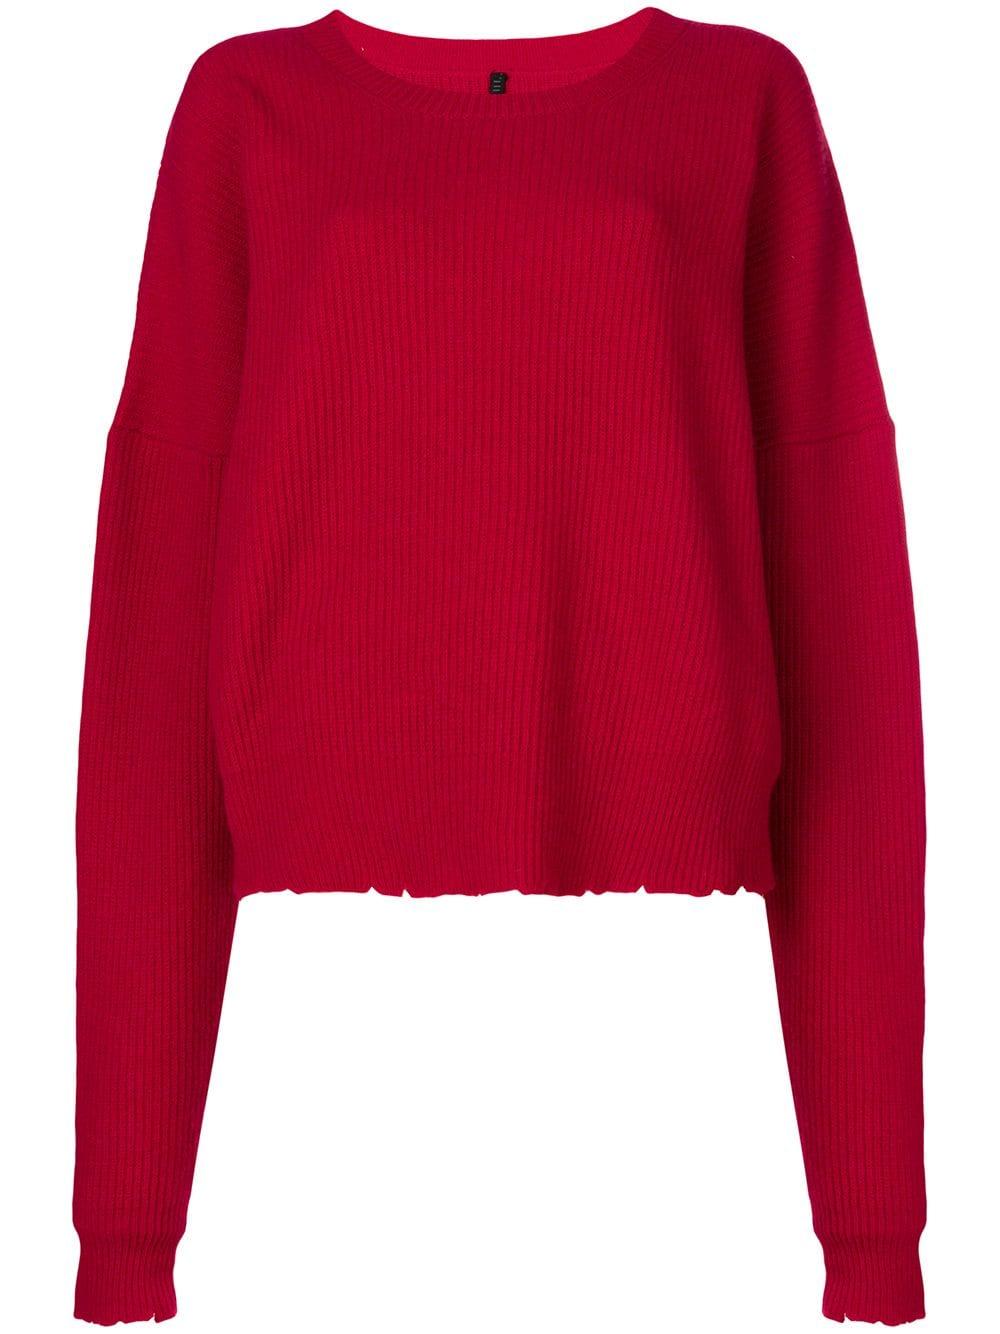 Unravel Project Wool Ribbed Sweater in Red - Lyst